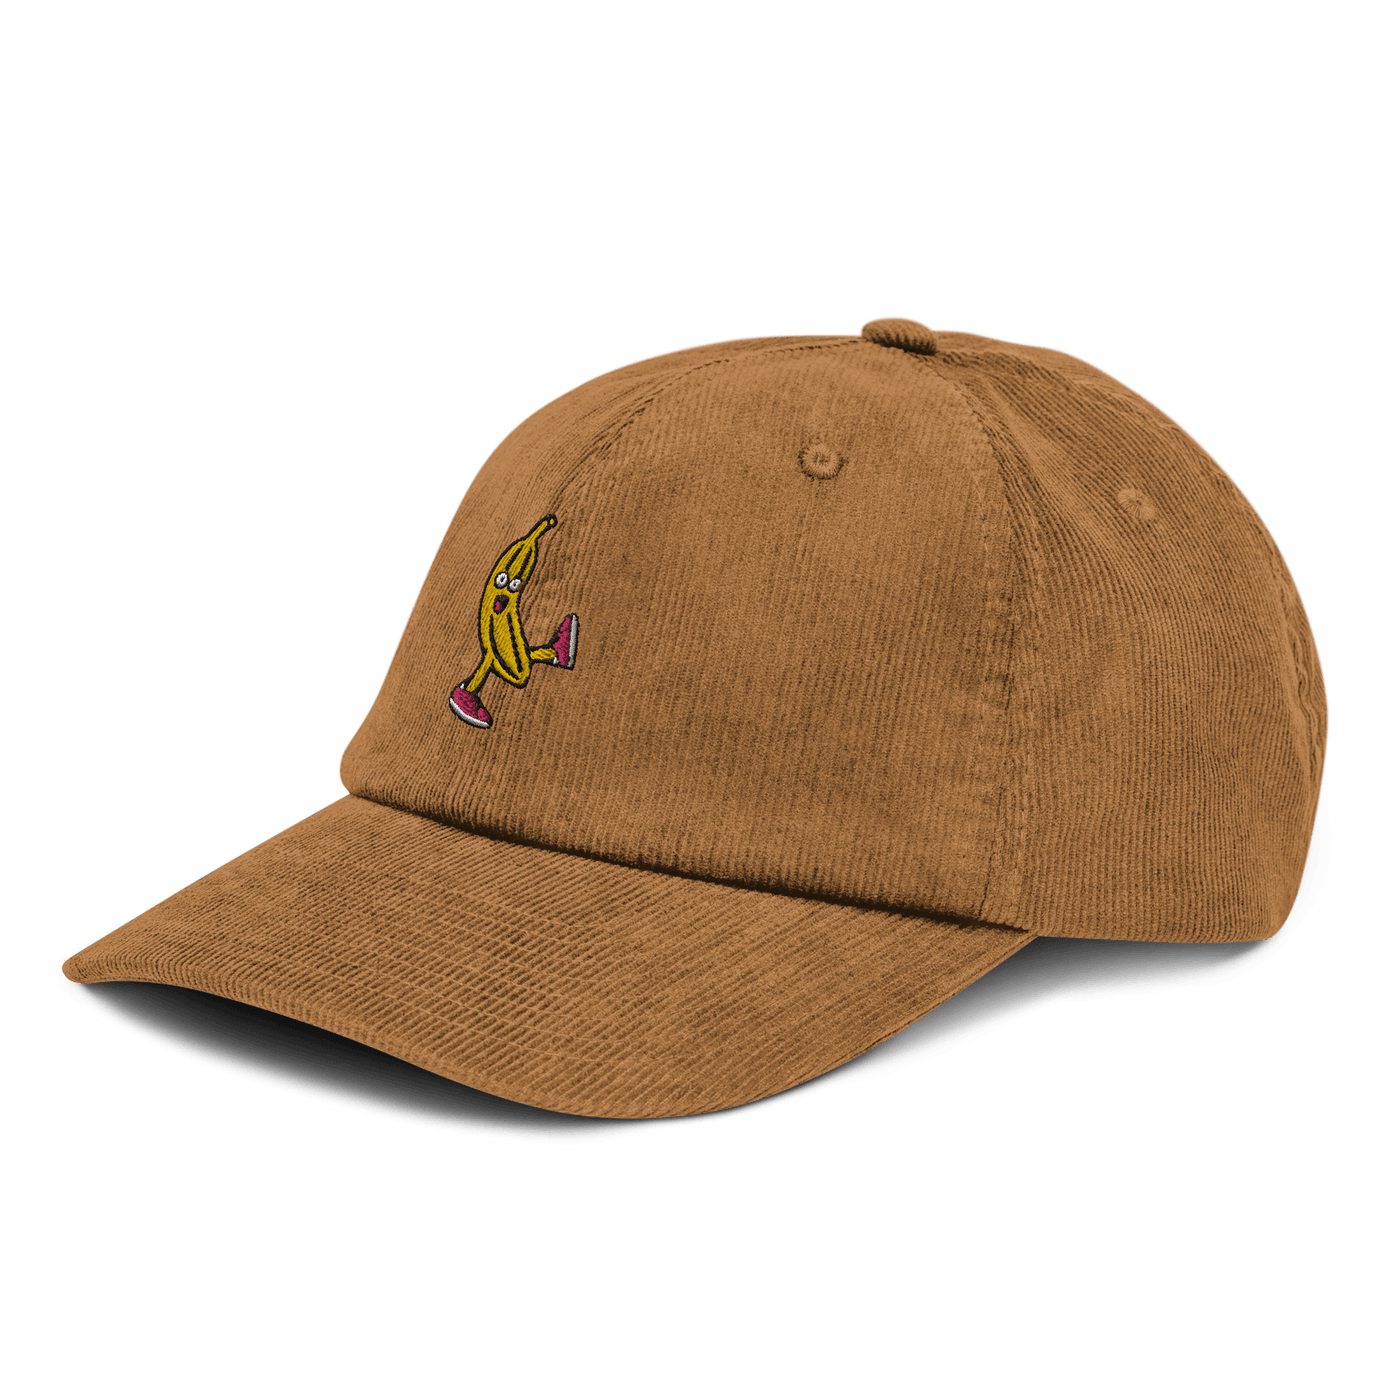 Drunk Banana Corduroy hat - Camel - - Just Another Cap Store